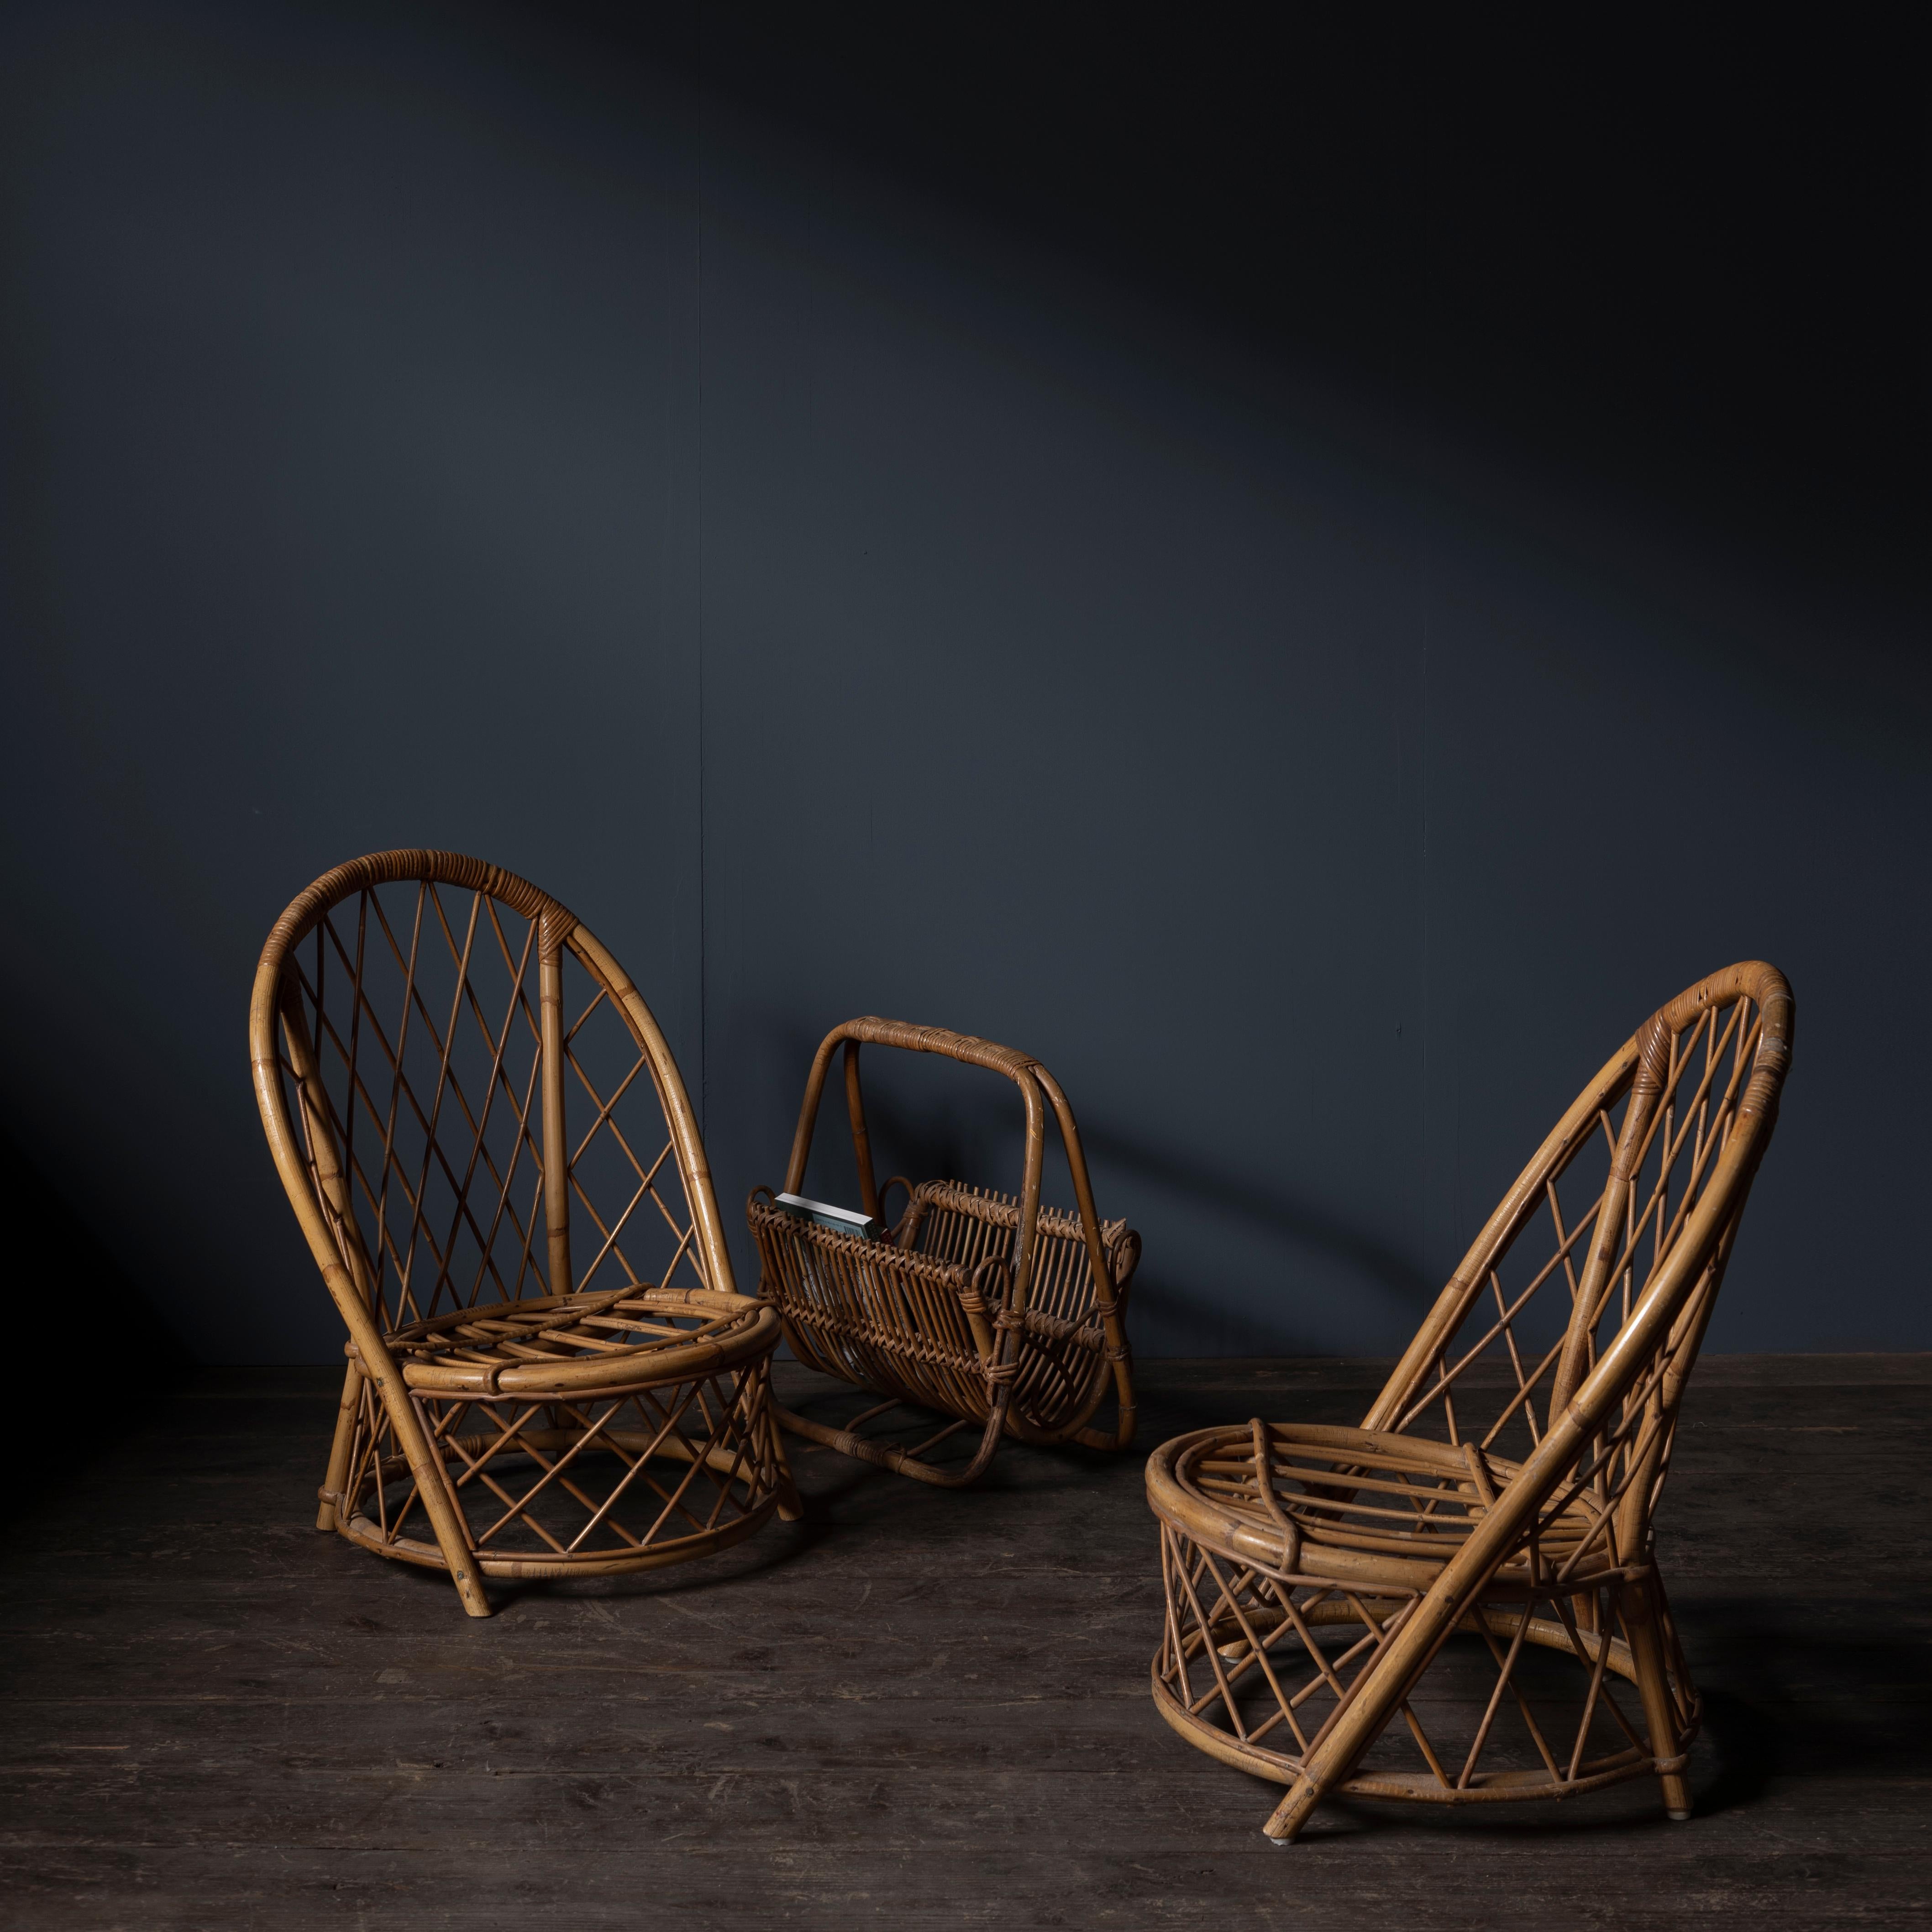 A set of two rattan low chairs and a magazine rack designed by French designers duo Adrien Audoux and Frida Minet.
1960s.
Original metal plates on the bottom of the chairs.

Dimensions
Chair: W45 x D51 x H70 x SH24.5 cm
Magazine rack: W46 x